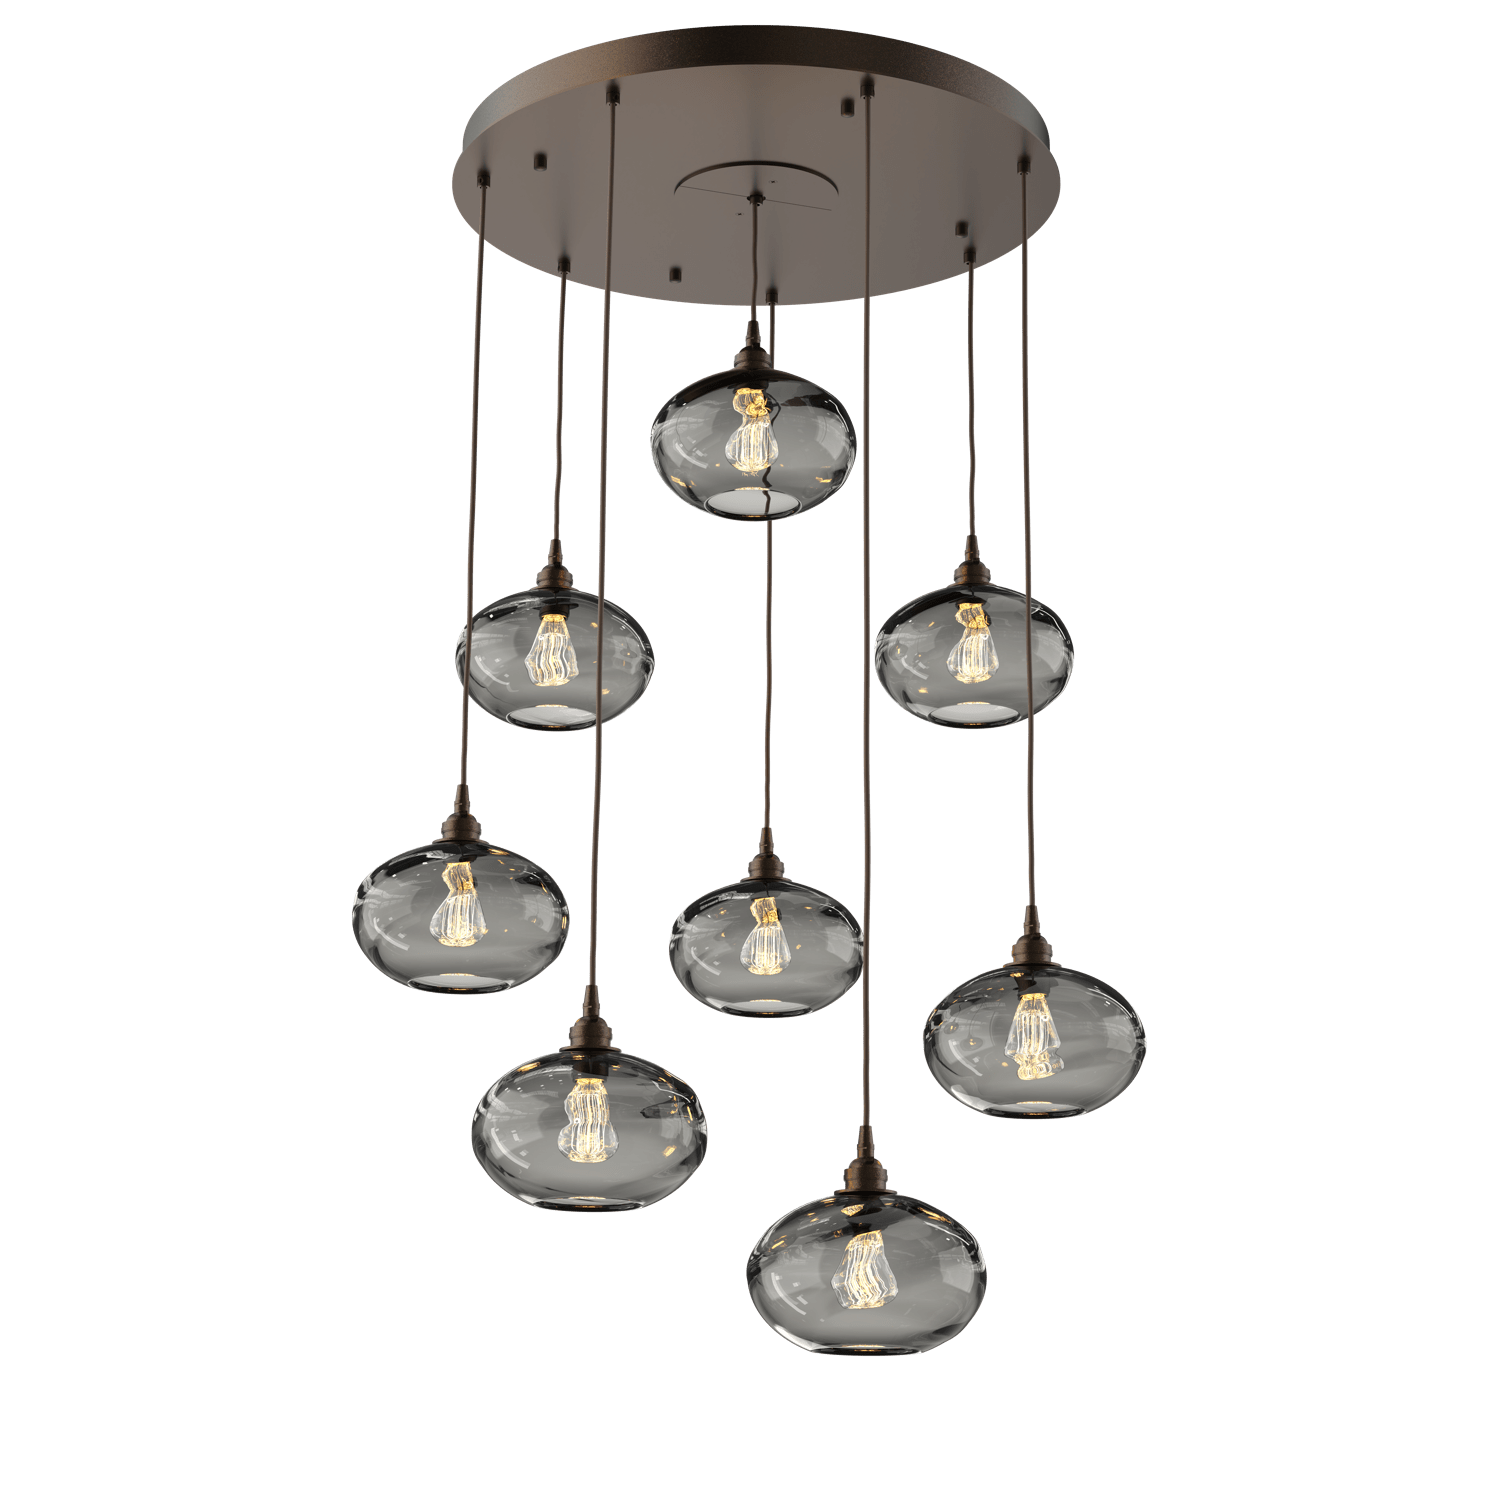 CHB0036-08-FB-OS-Hammerton-Studio-Optic-Blown-Glass-Coppa-8-light-round-pendant-chandelier-with-flat-bronze-finish-and-optic-smoke-blown-glass-shades-and-incandescent-lamping